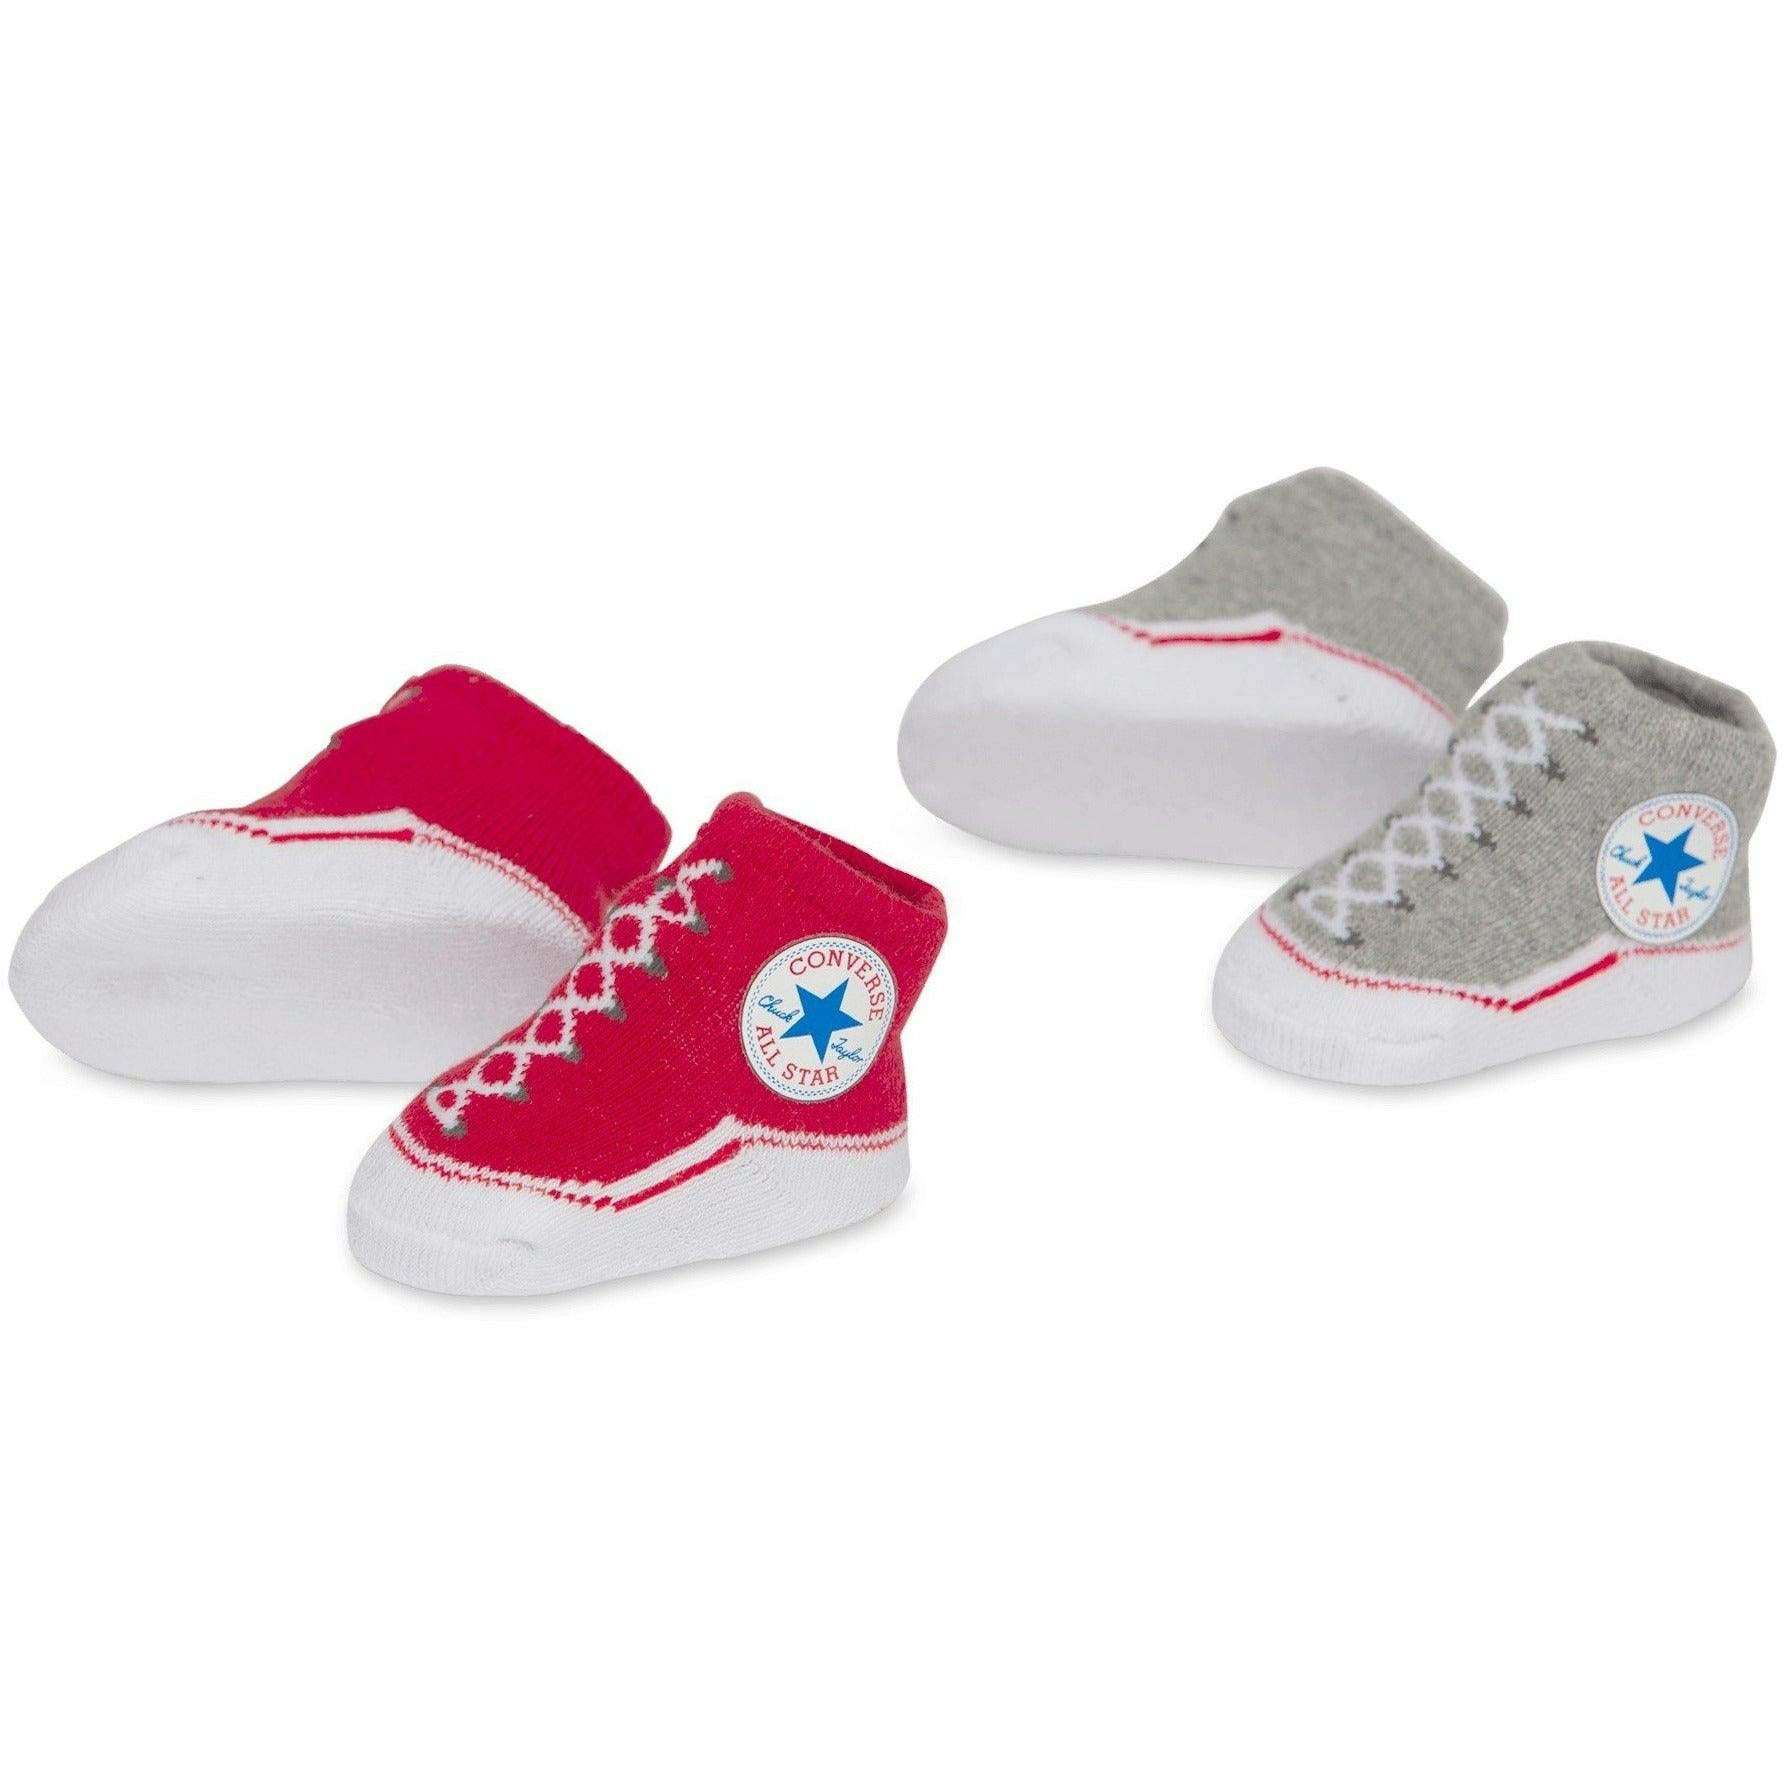 Converse Infant Booties 